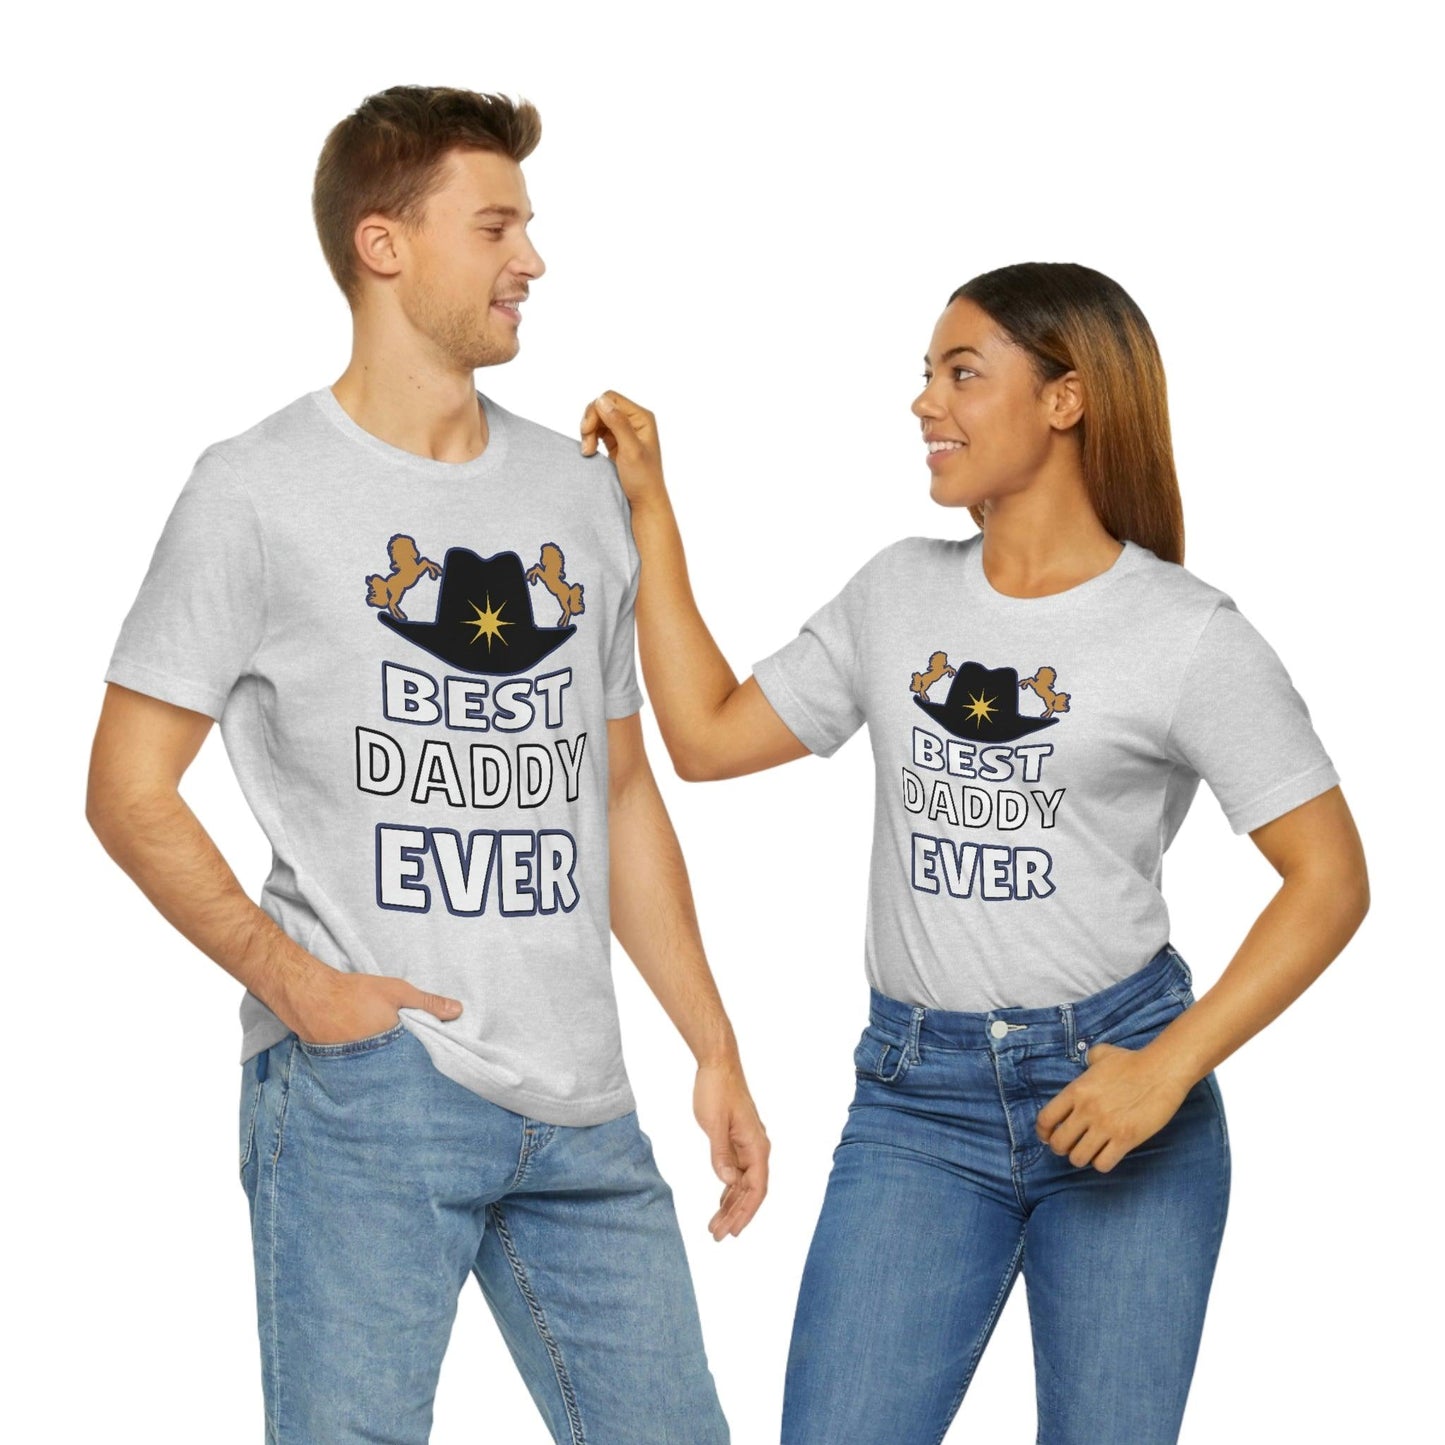 Best Daddy Ever Shirt - Gift for dad